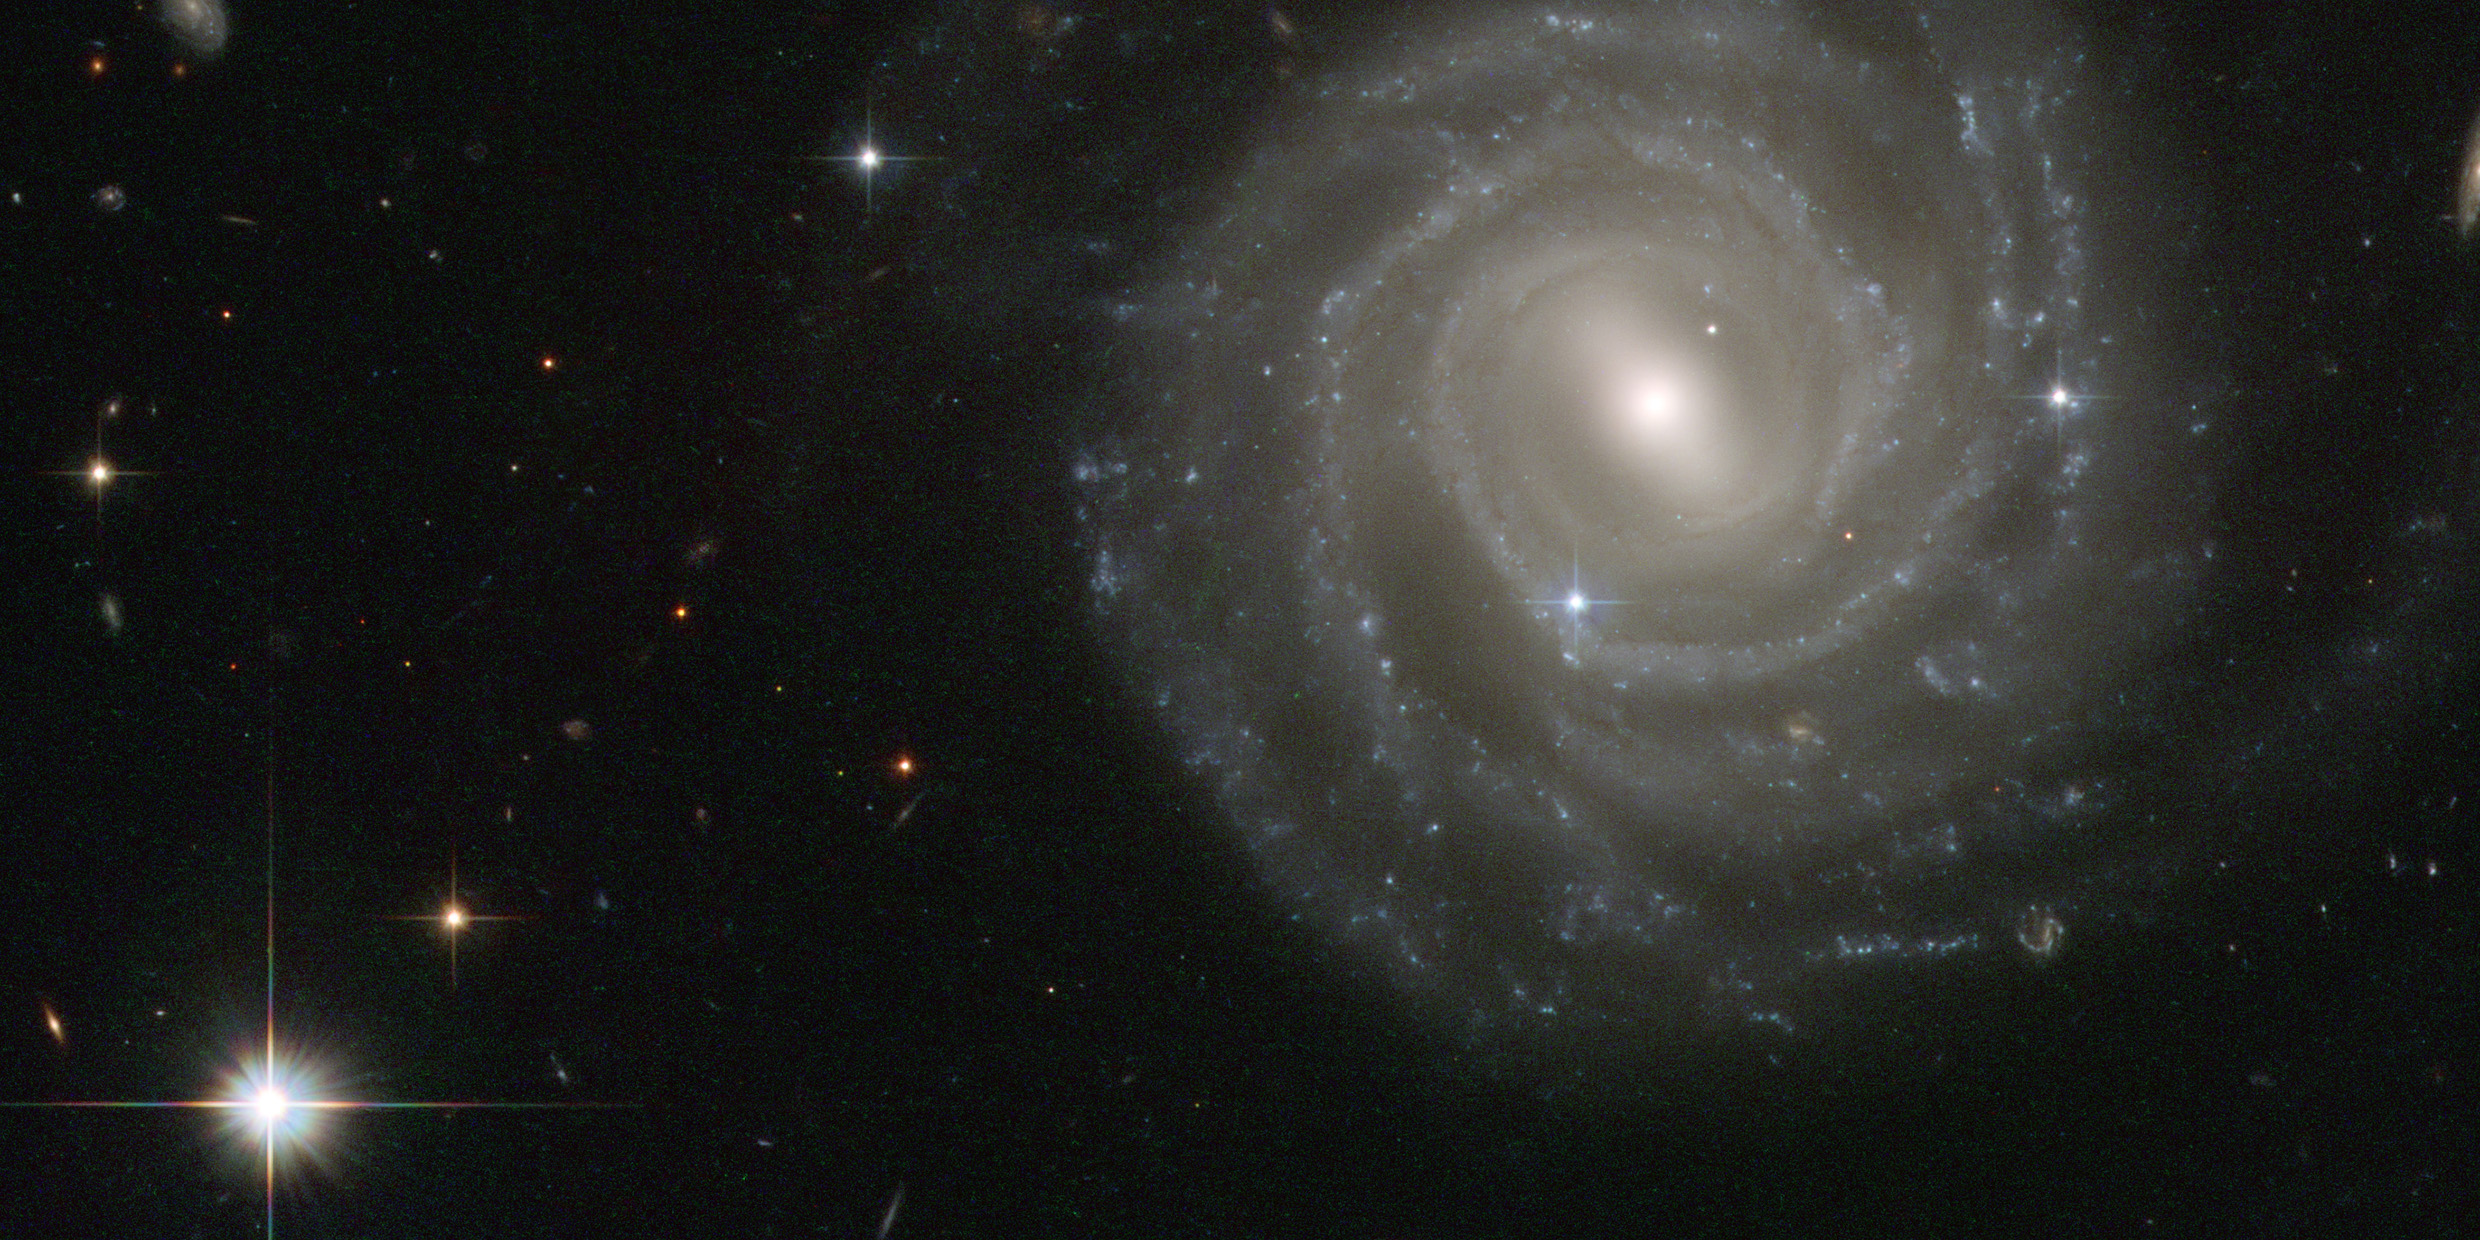 Image of barred spiral galaxy